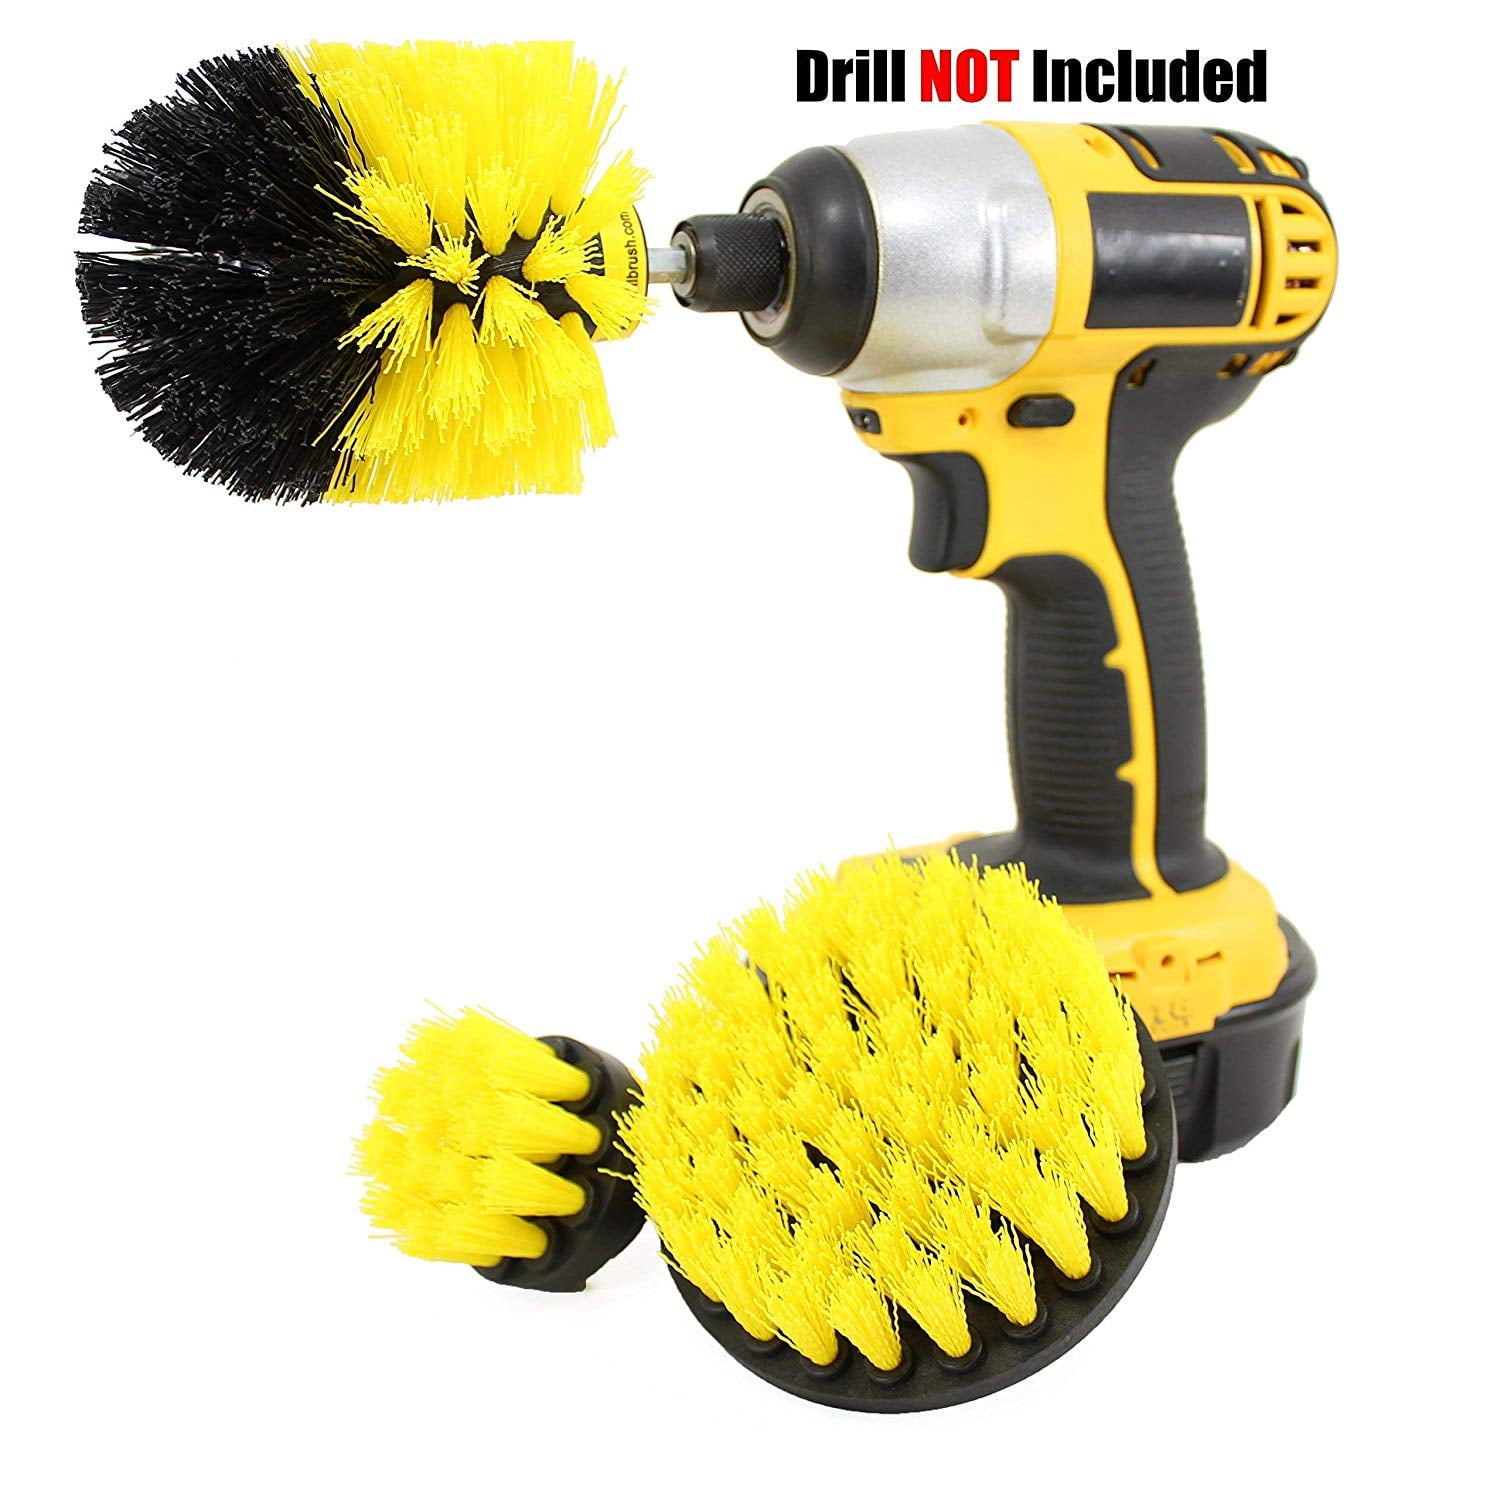 Drill Brush Spin Scrubber Kit Cleaning Supplies Bath Mat Scrubber Shower Stalls Grout Cleaner Clean Sinks Bathtub Tile Bidet Shower Curtain and Flooring Carpet Bathroom Rugs Toilet 